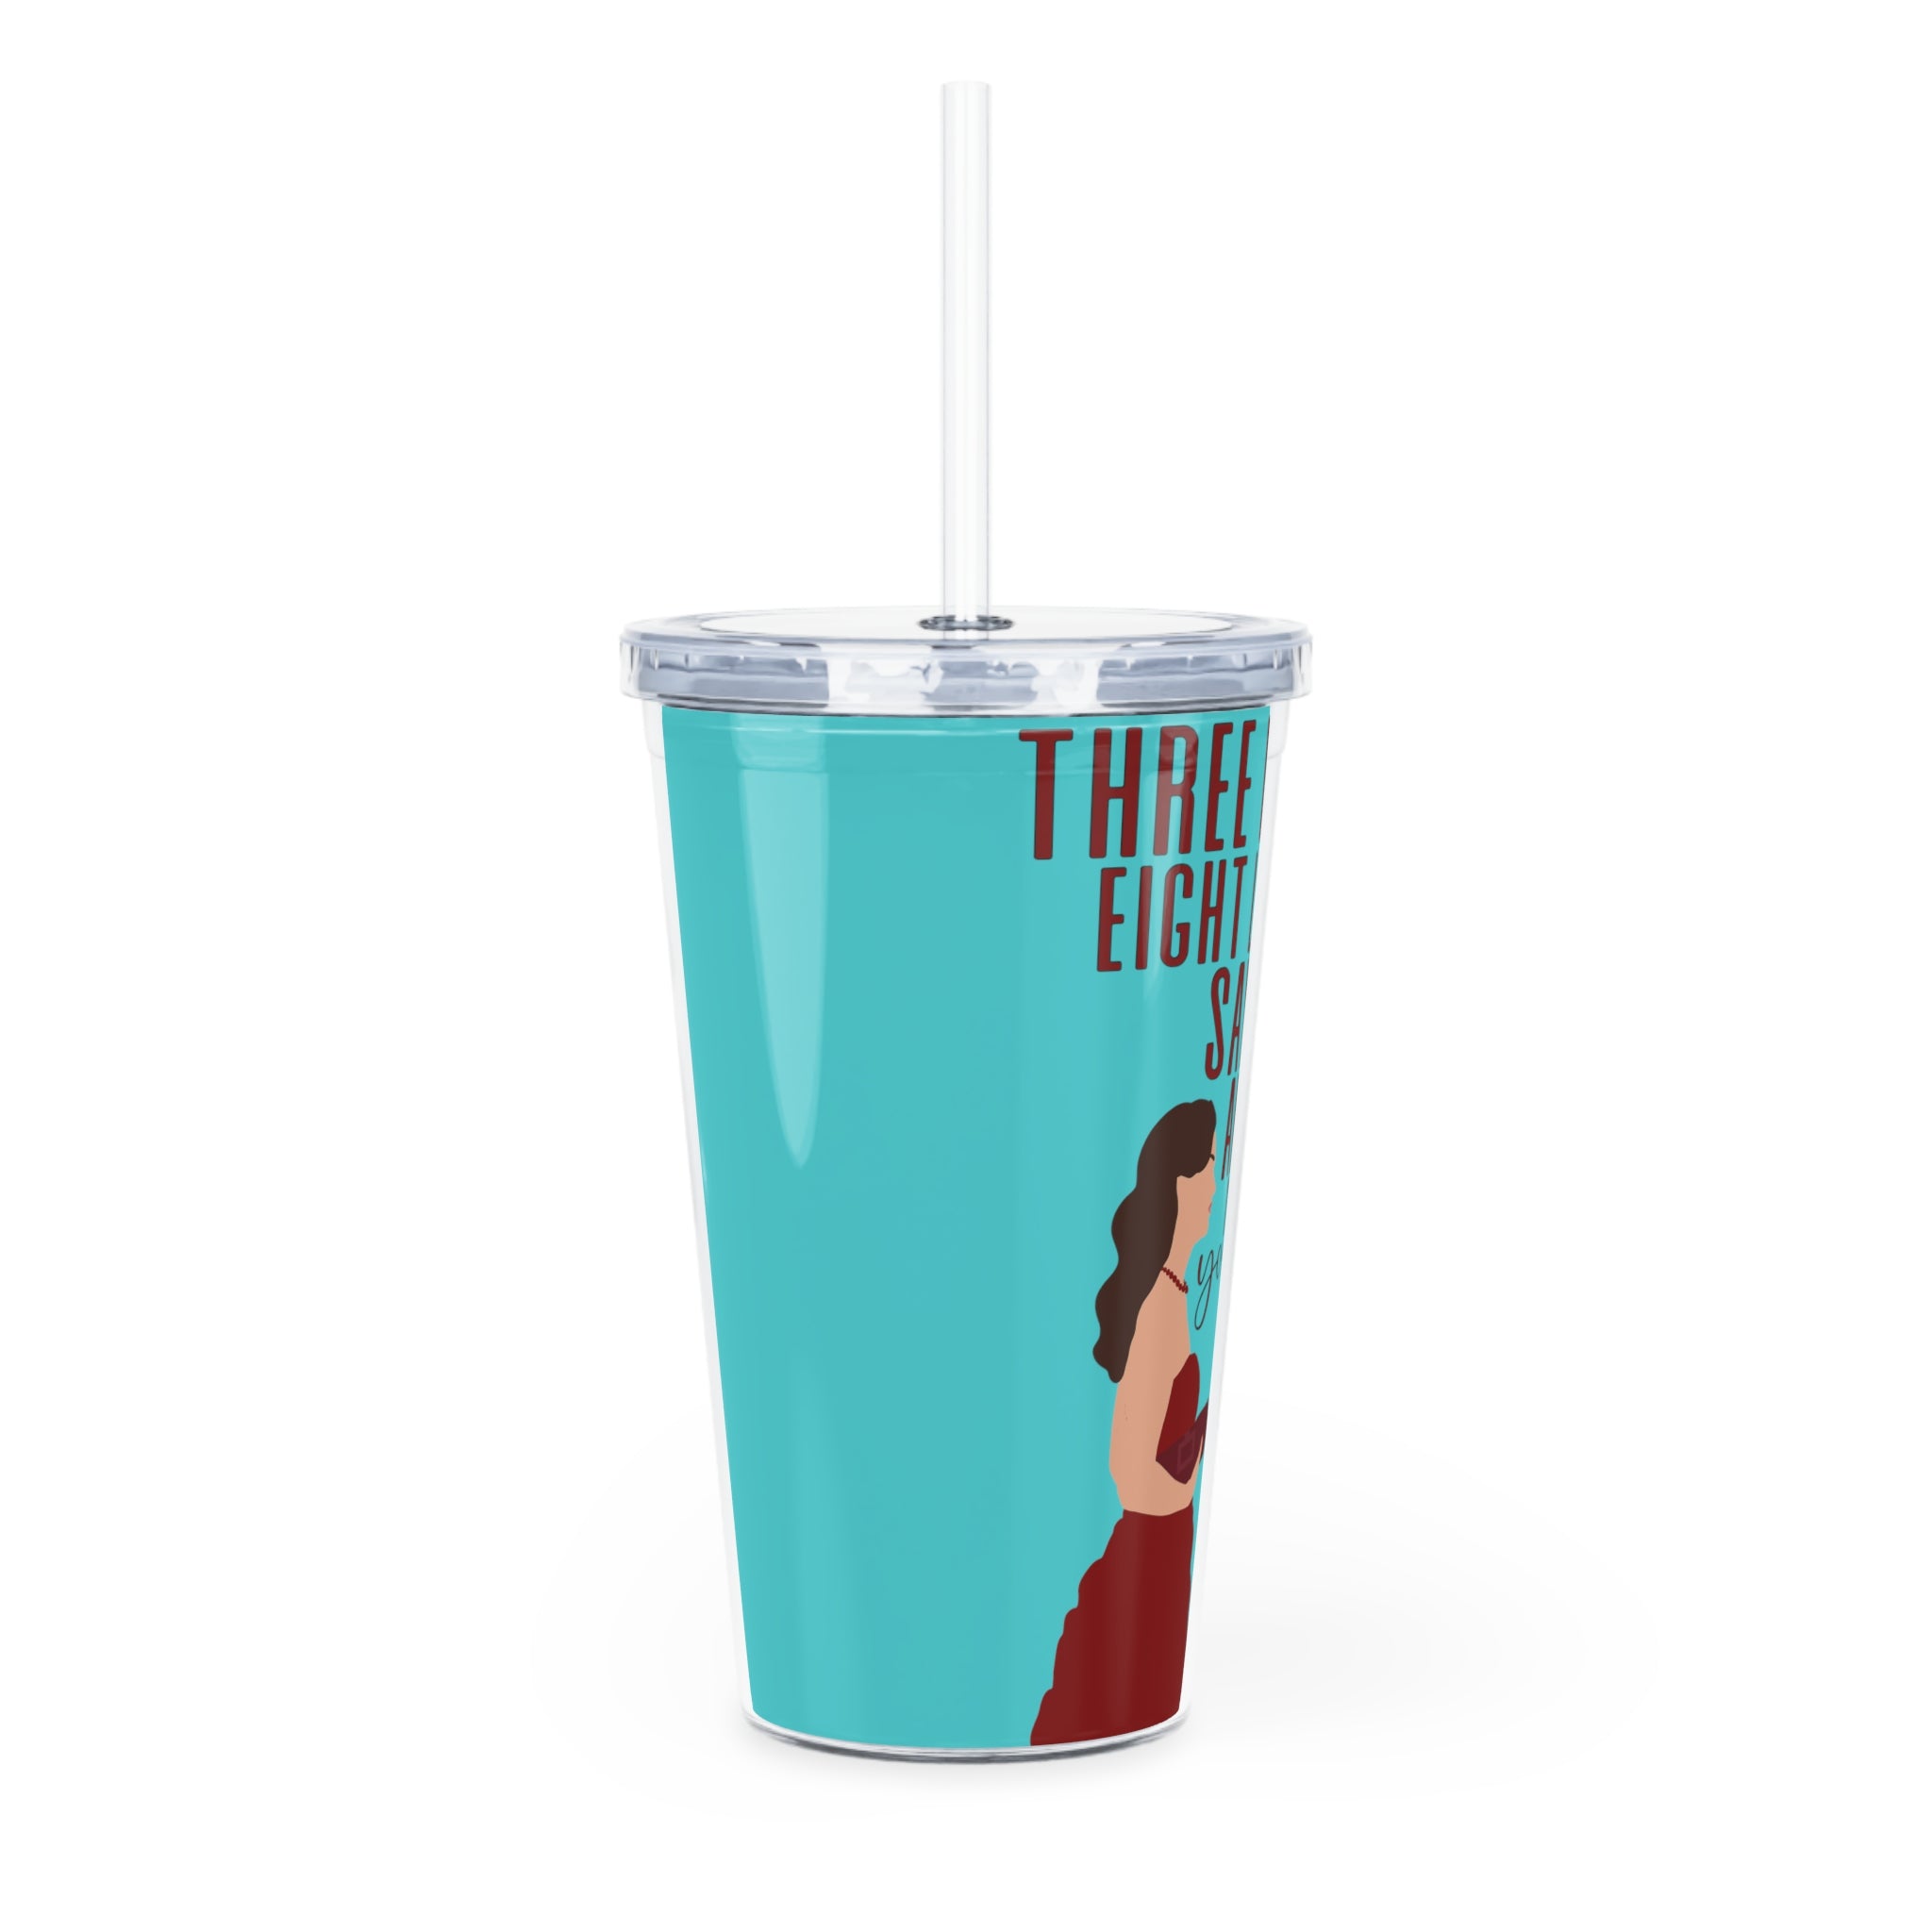 Three Words Eight Letters Chuck & Blair Plastic Tumbler with Straw